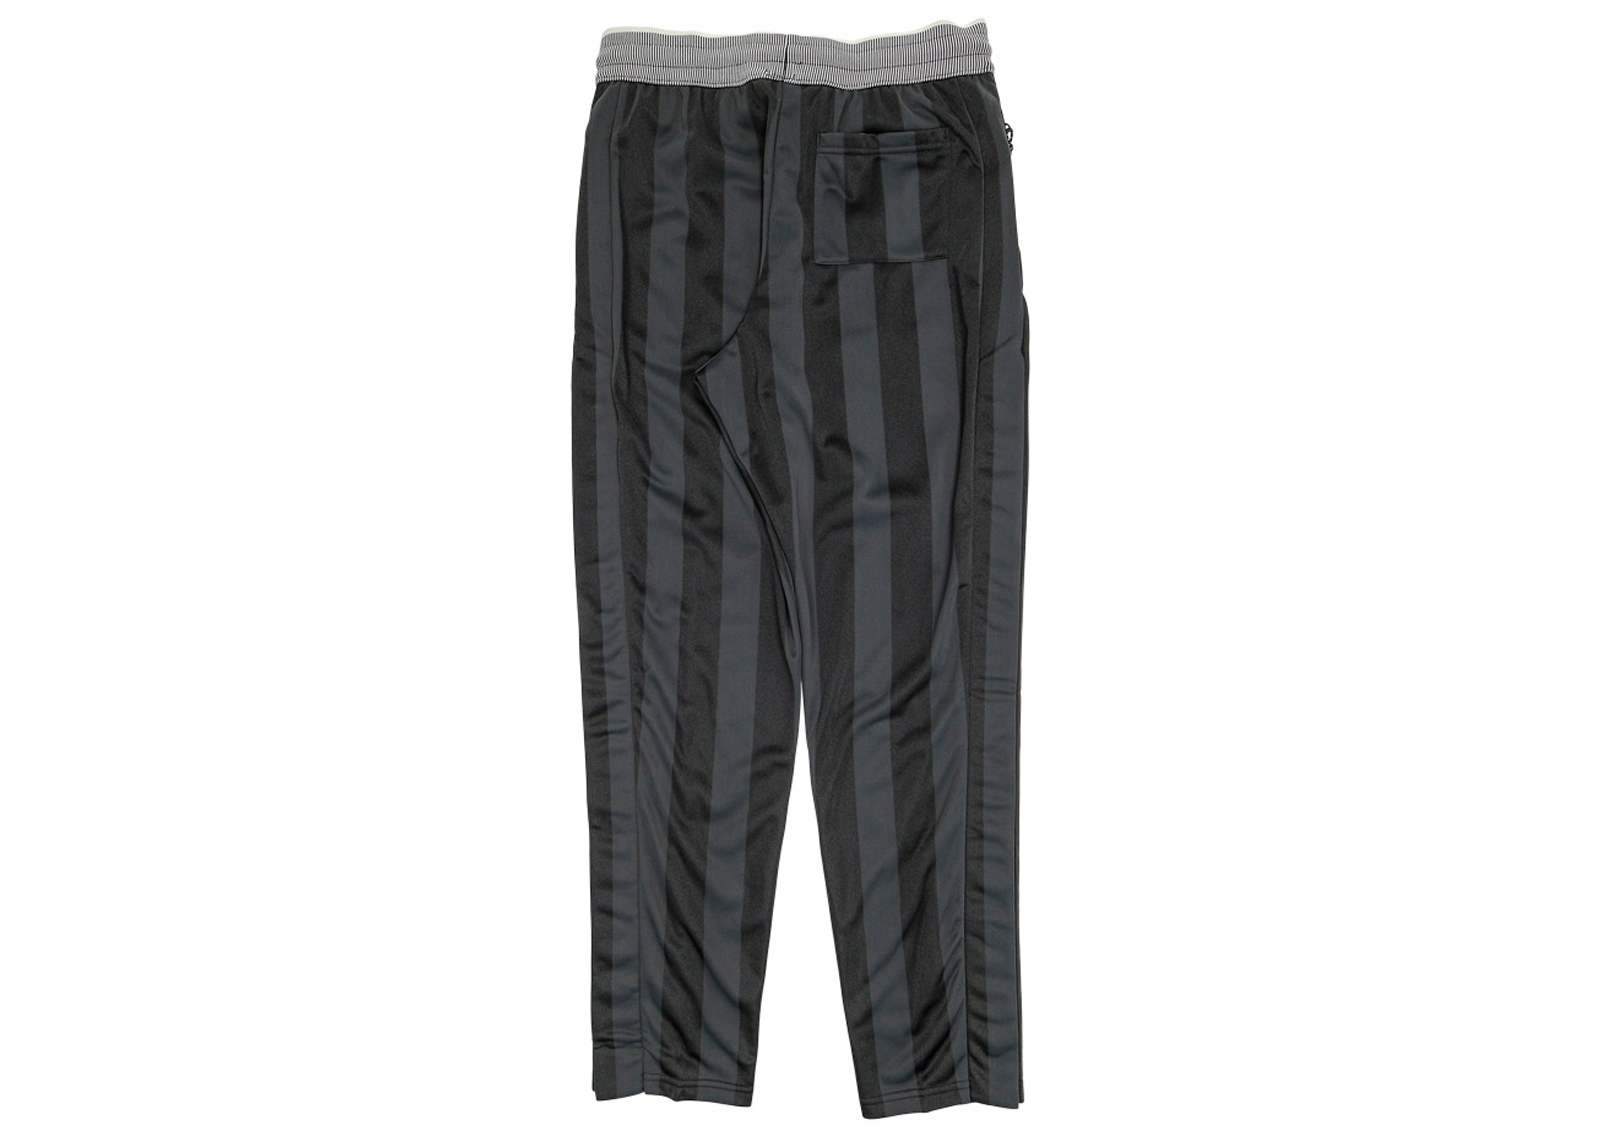 Nike x Pigalle Tearaway Pants Anthracite